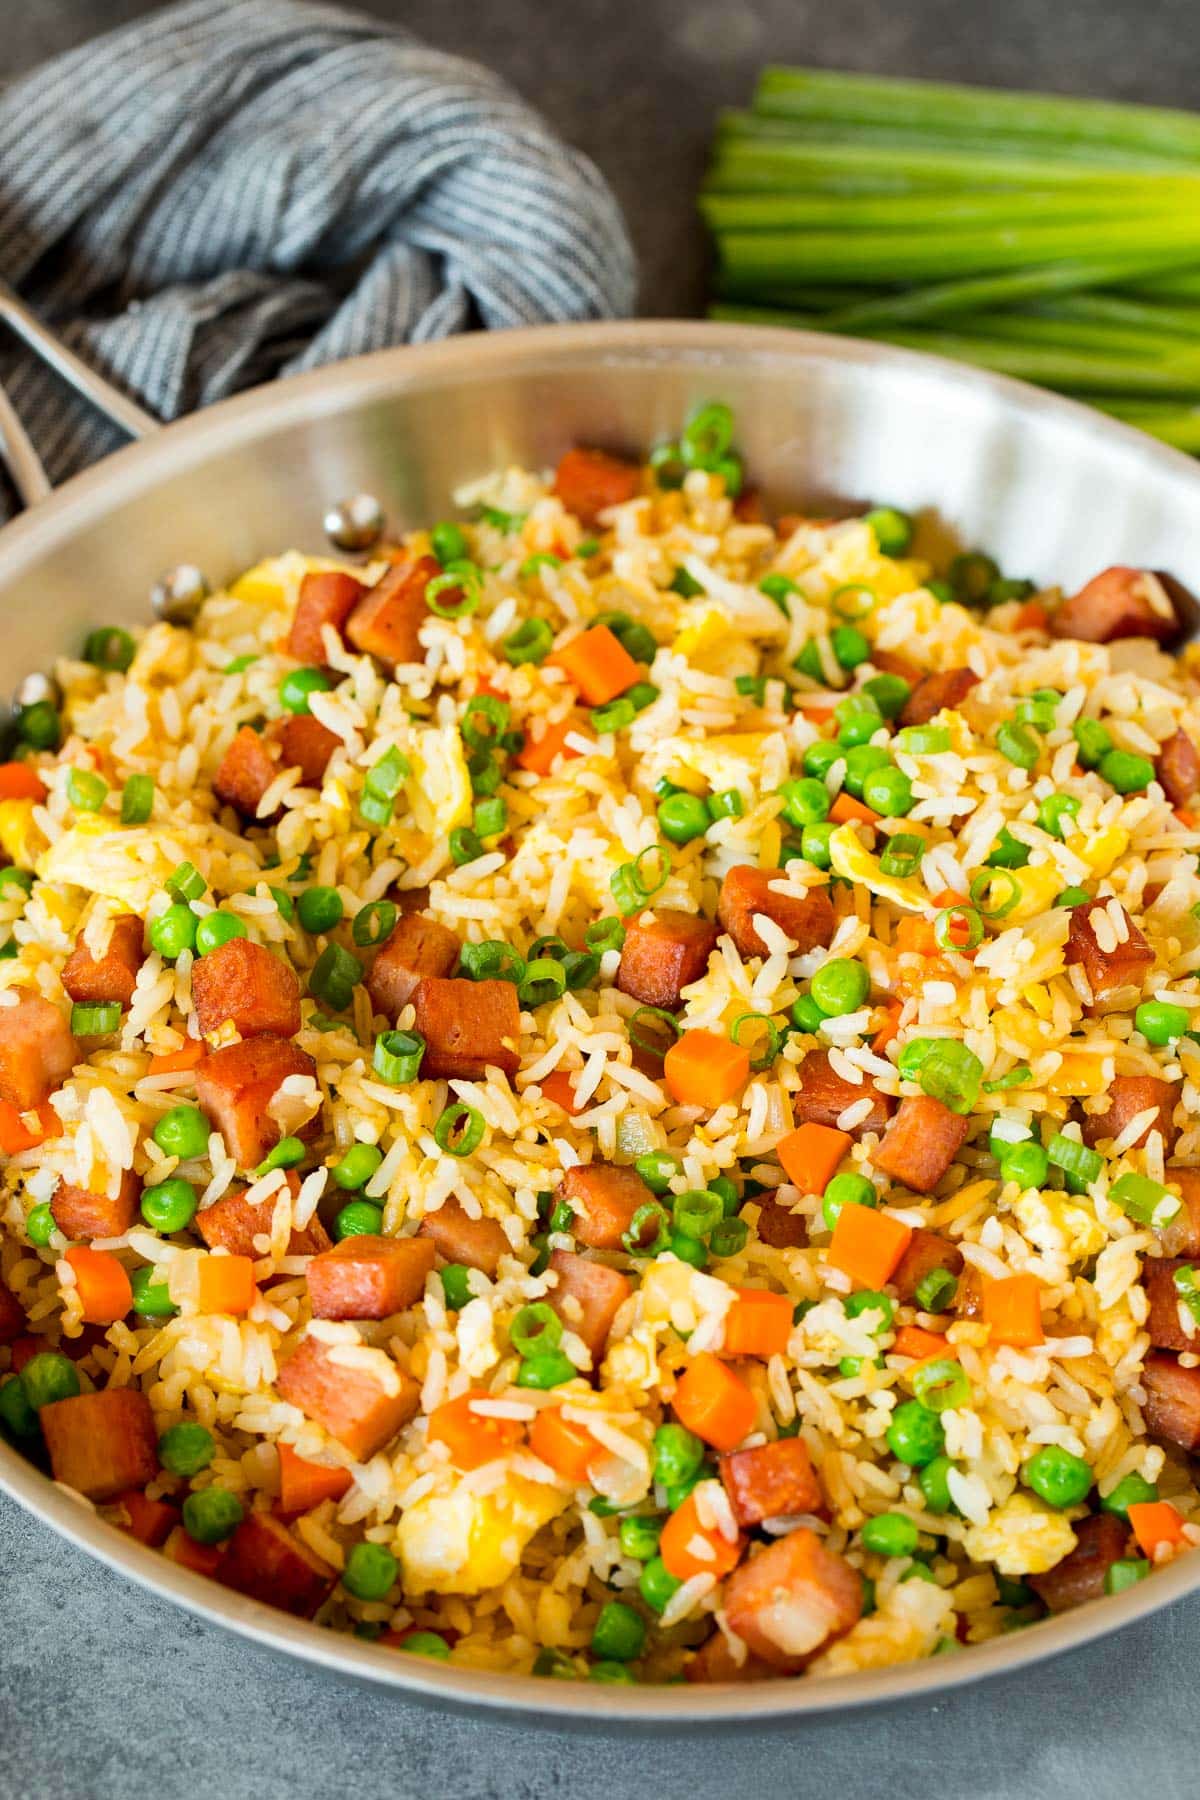 A pan of fried rice with meat and vegetables.